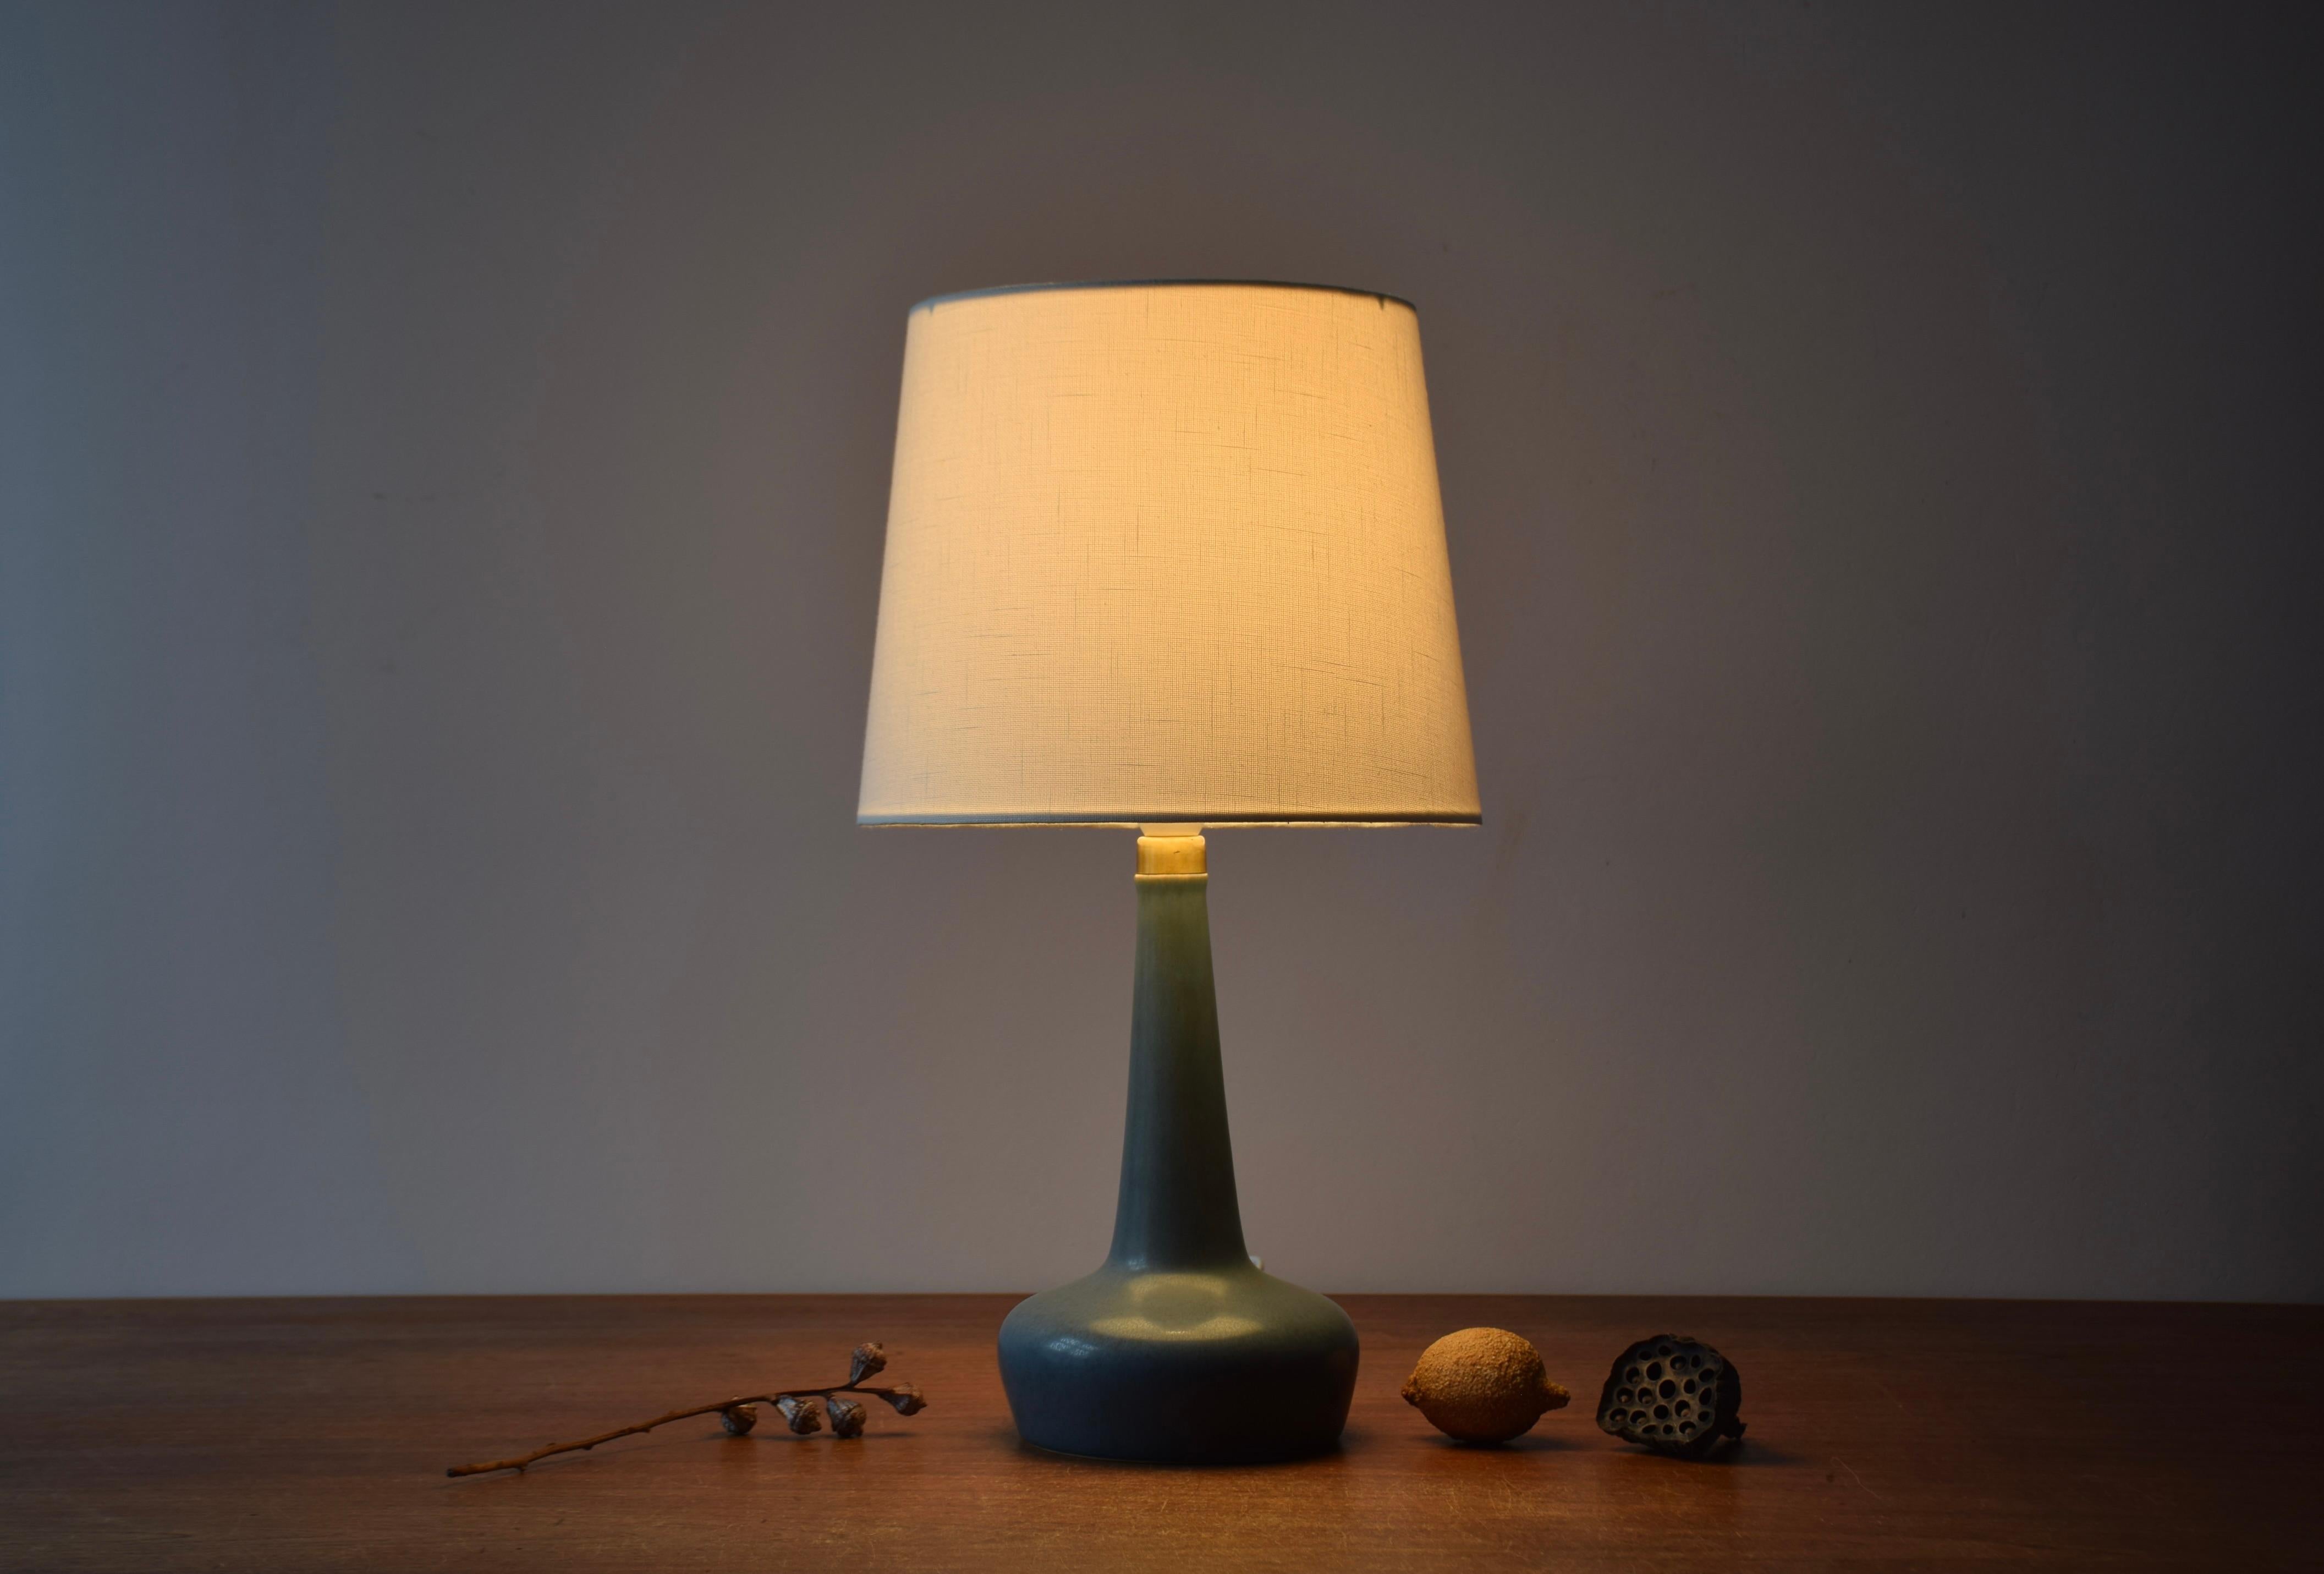 Mid-century Danish Palshus / Le Klint table lamp with dusted blue haresfur glaze contrasted by a top made from brass.

The lamp is designed by Esben Klint and made at the Danish ceramic studio Palshus for the Danish lamp manufacturer Le Klint. Made